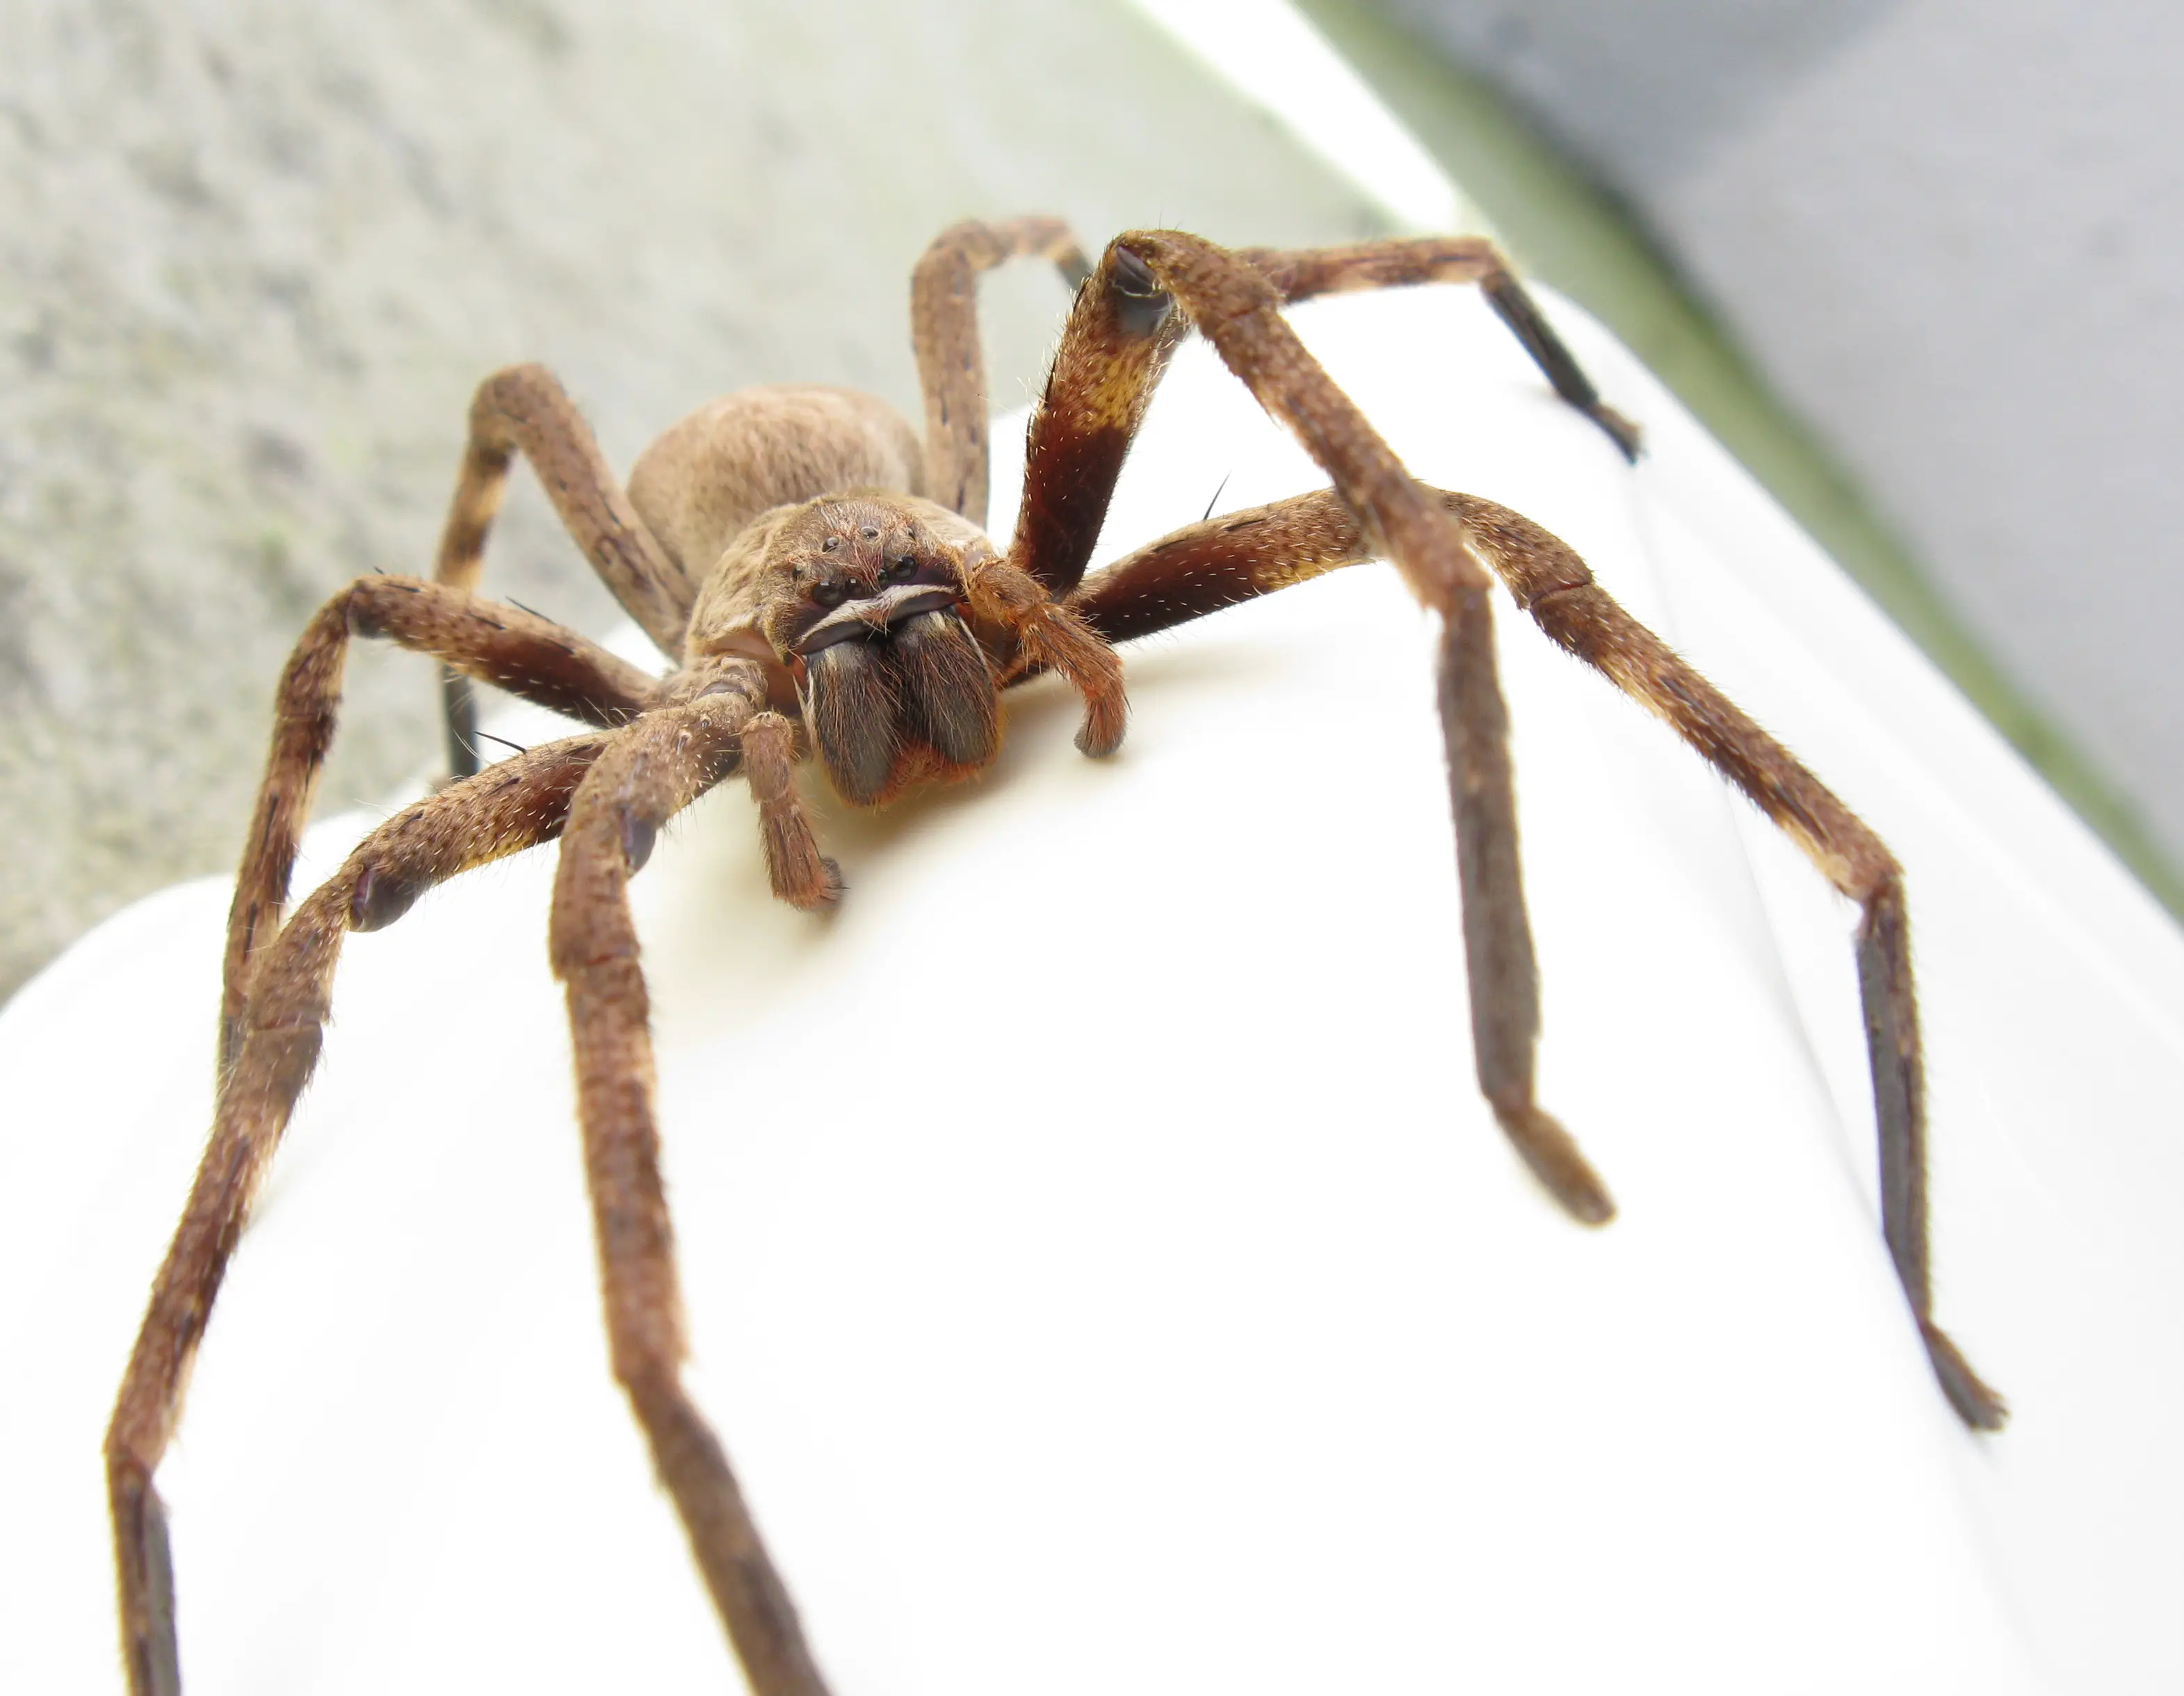 What Is A Huntsman Spider?